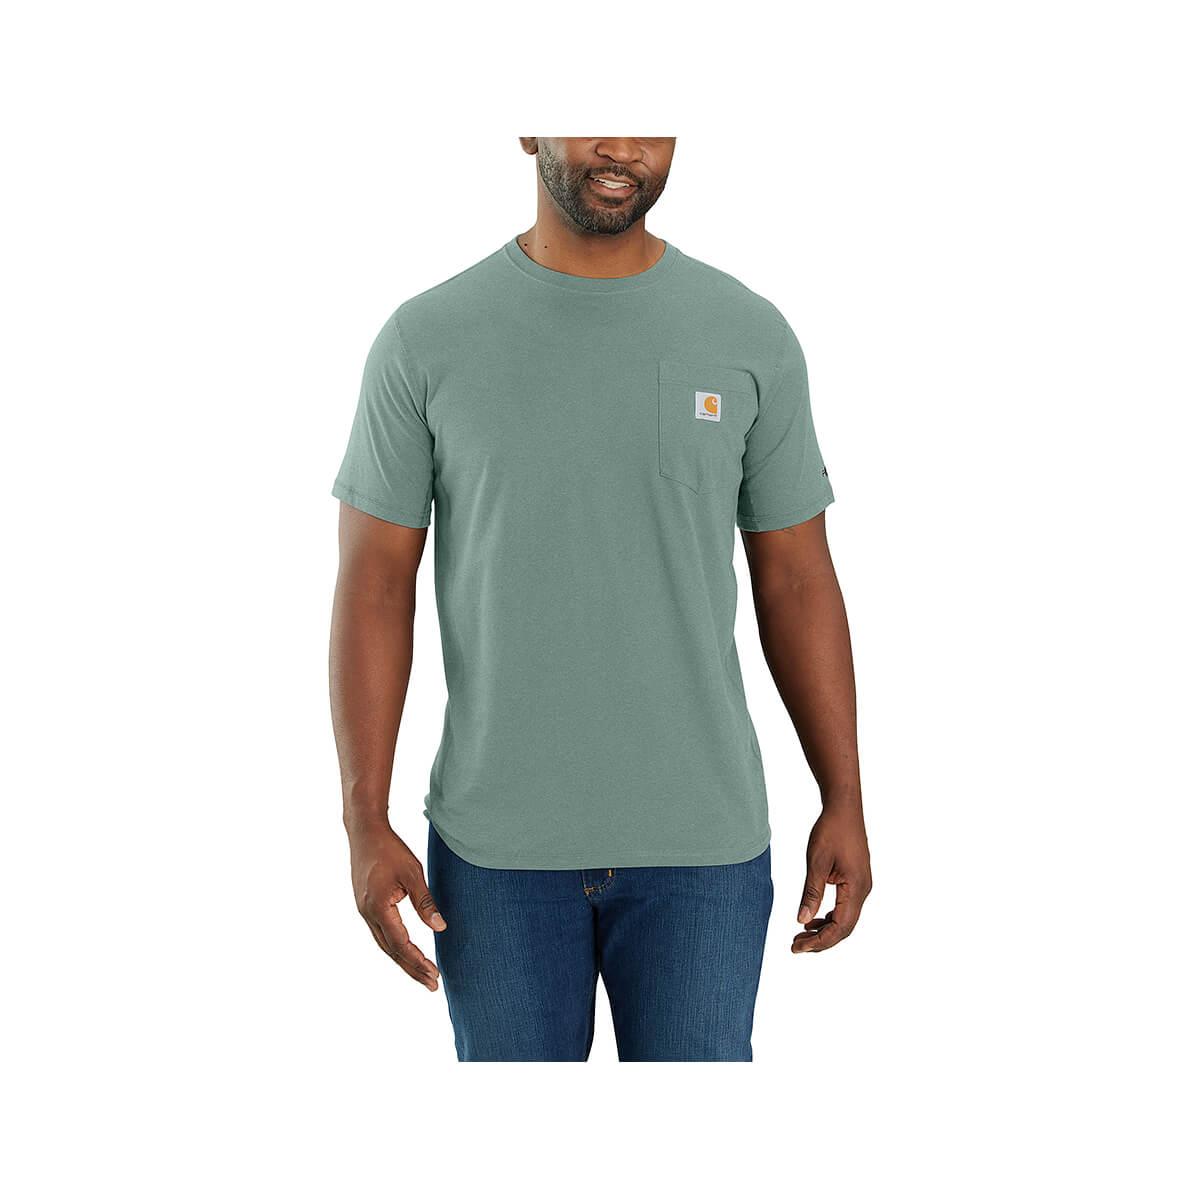  Men's Force Relaxed Fit Short Sleeve Pocket T- Shirt